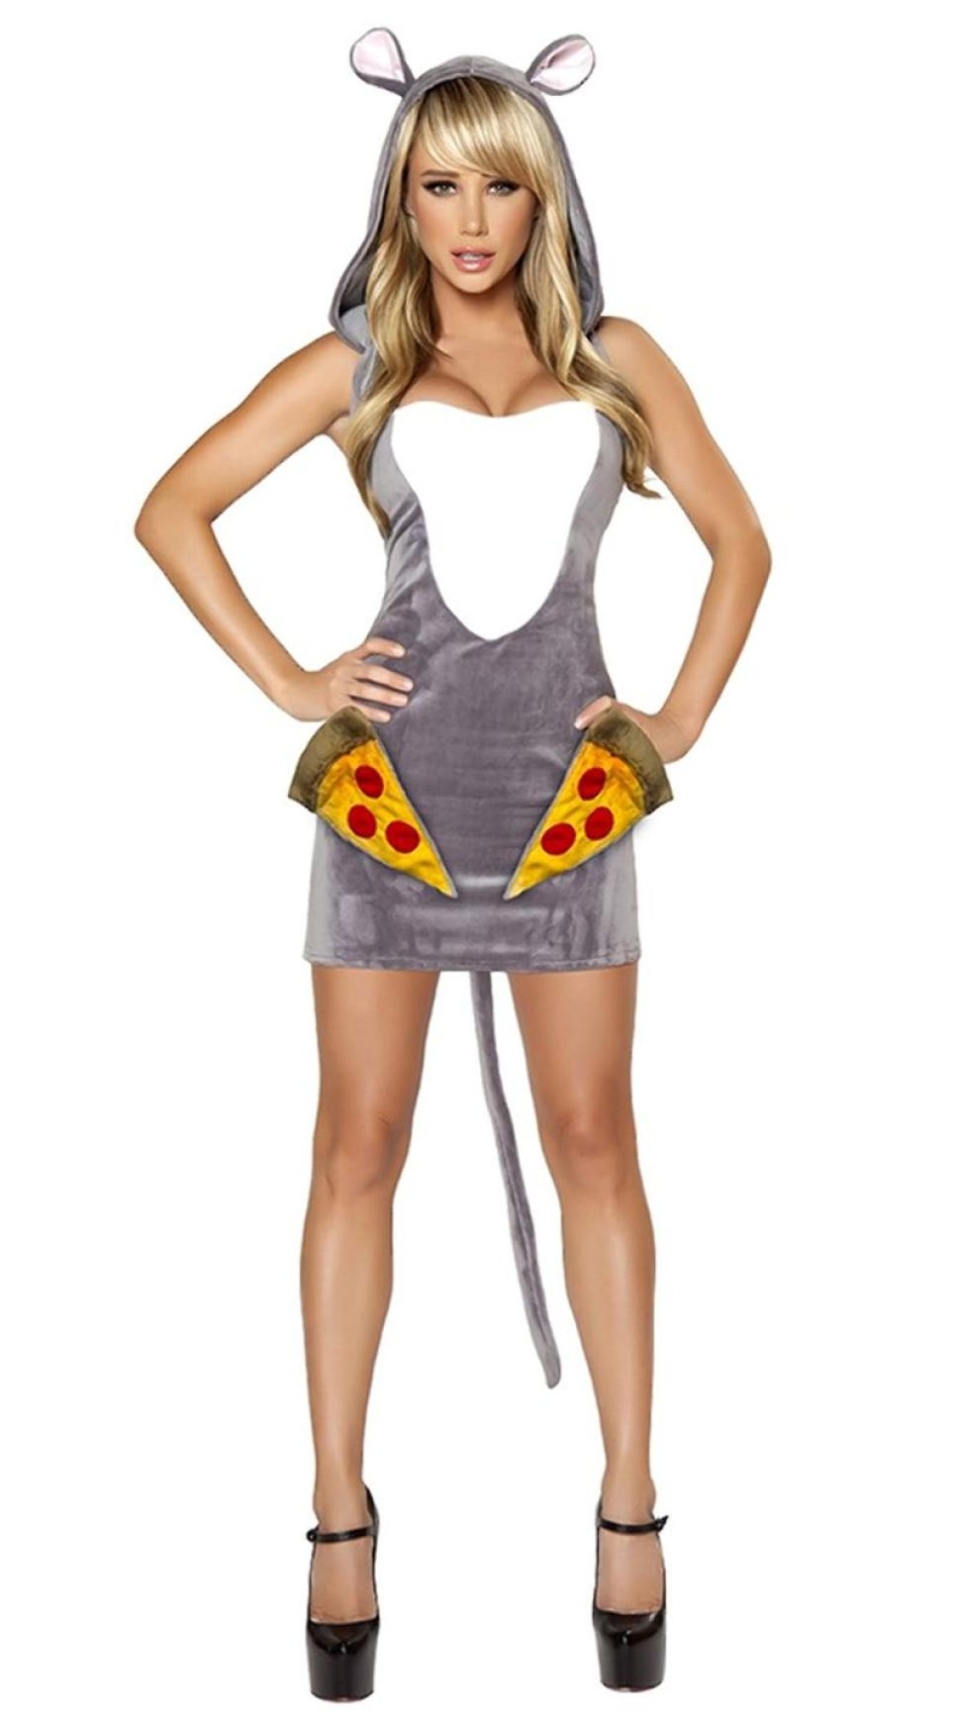 New York’s pizza rat in sexy costume form. 